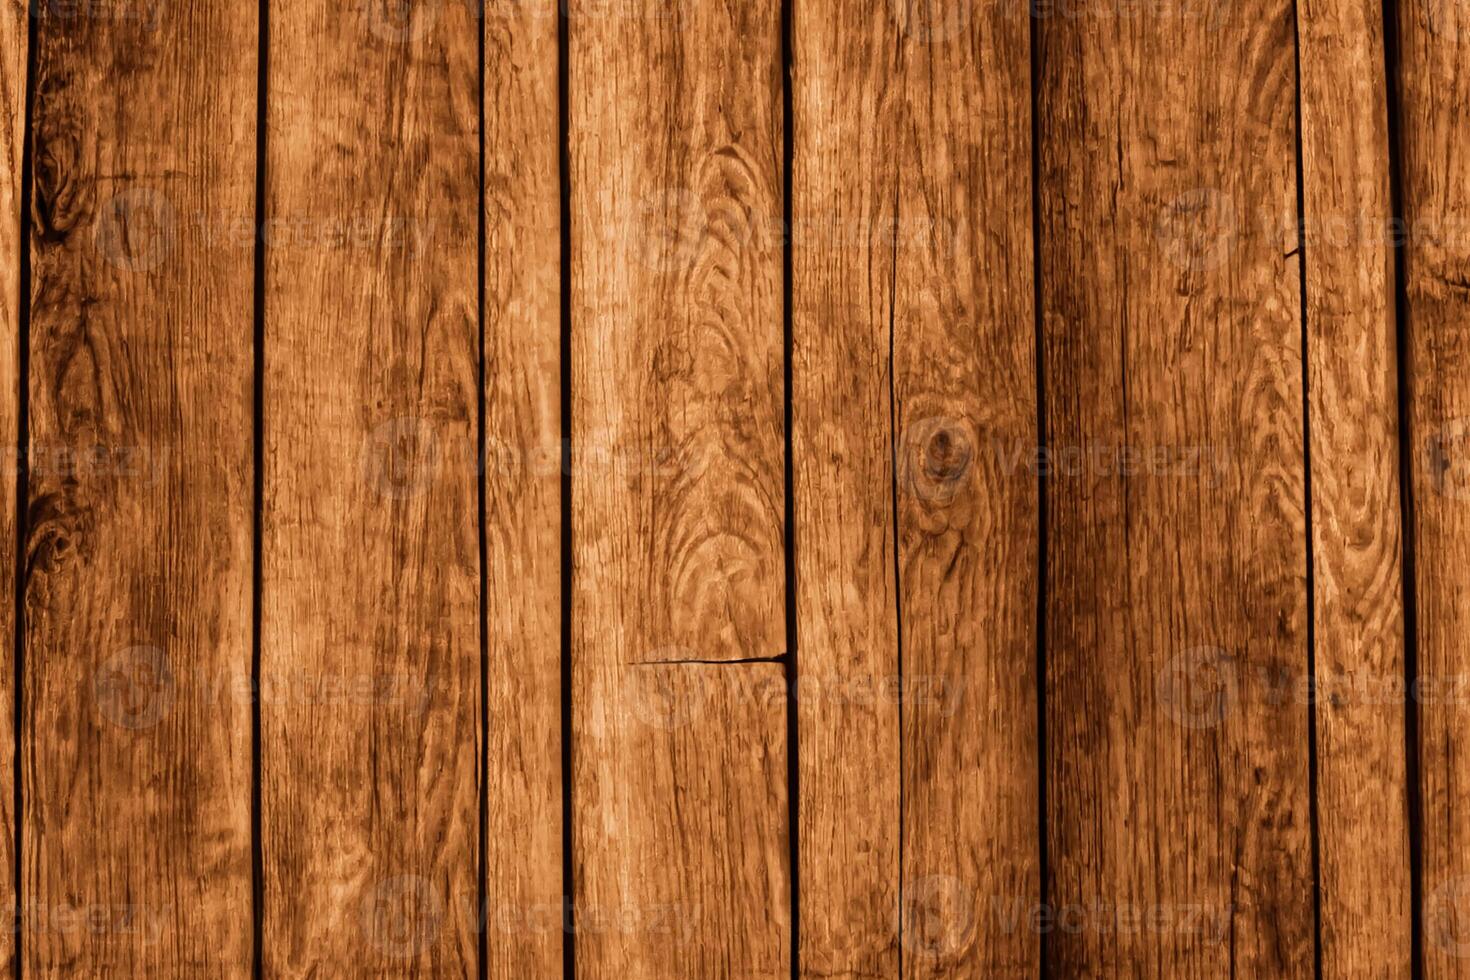 Natural Elegance Diving into the Aesthetic Splendor of a Beautiful Wood Background where Time Weathered Grains Weave a Tale of Earthy Warmth, Creating a Stunning Backdrop of Organic photo